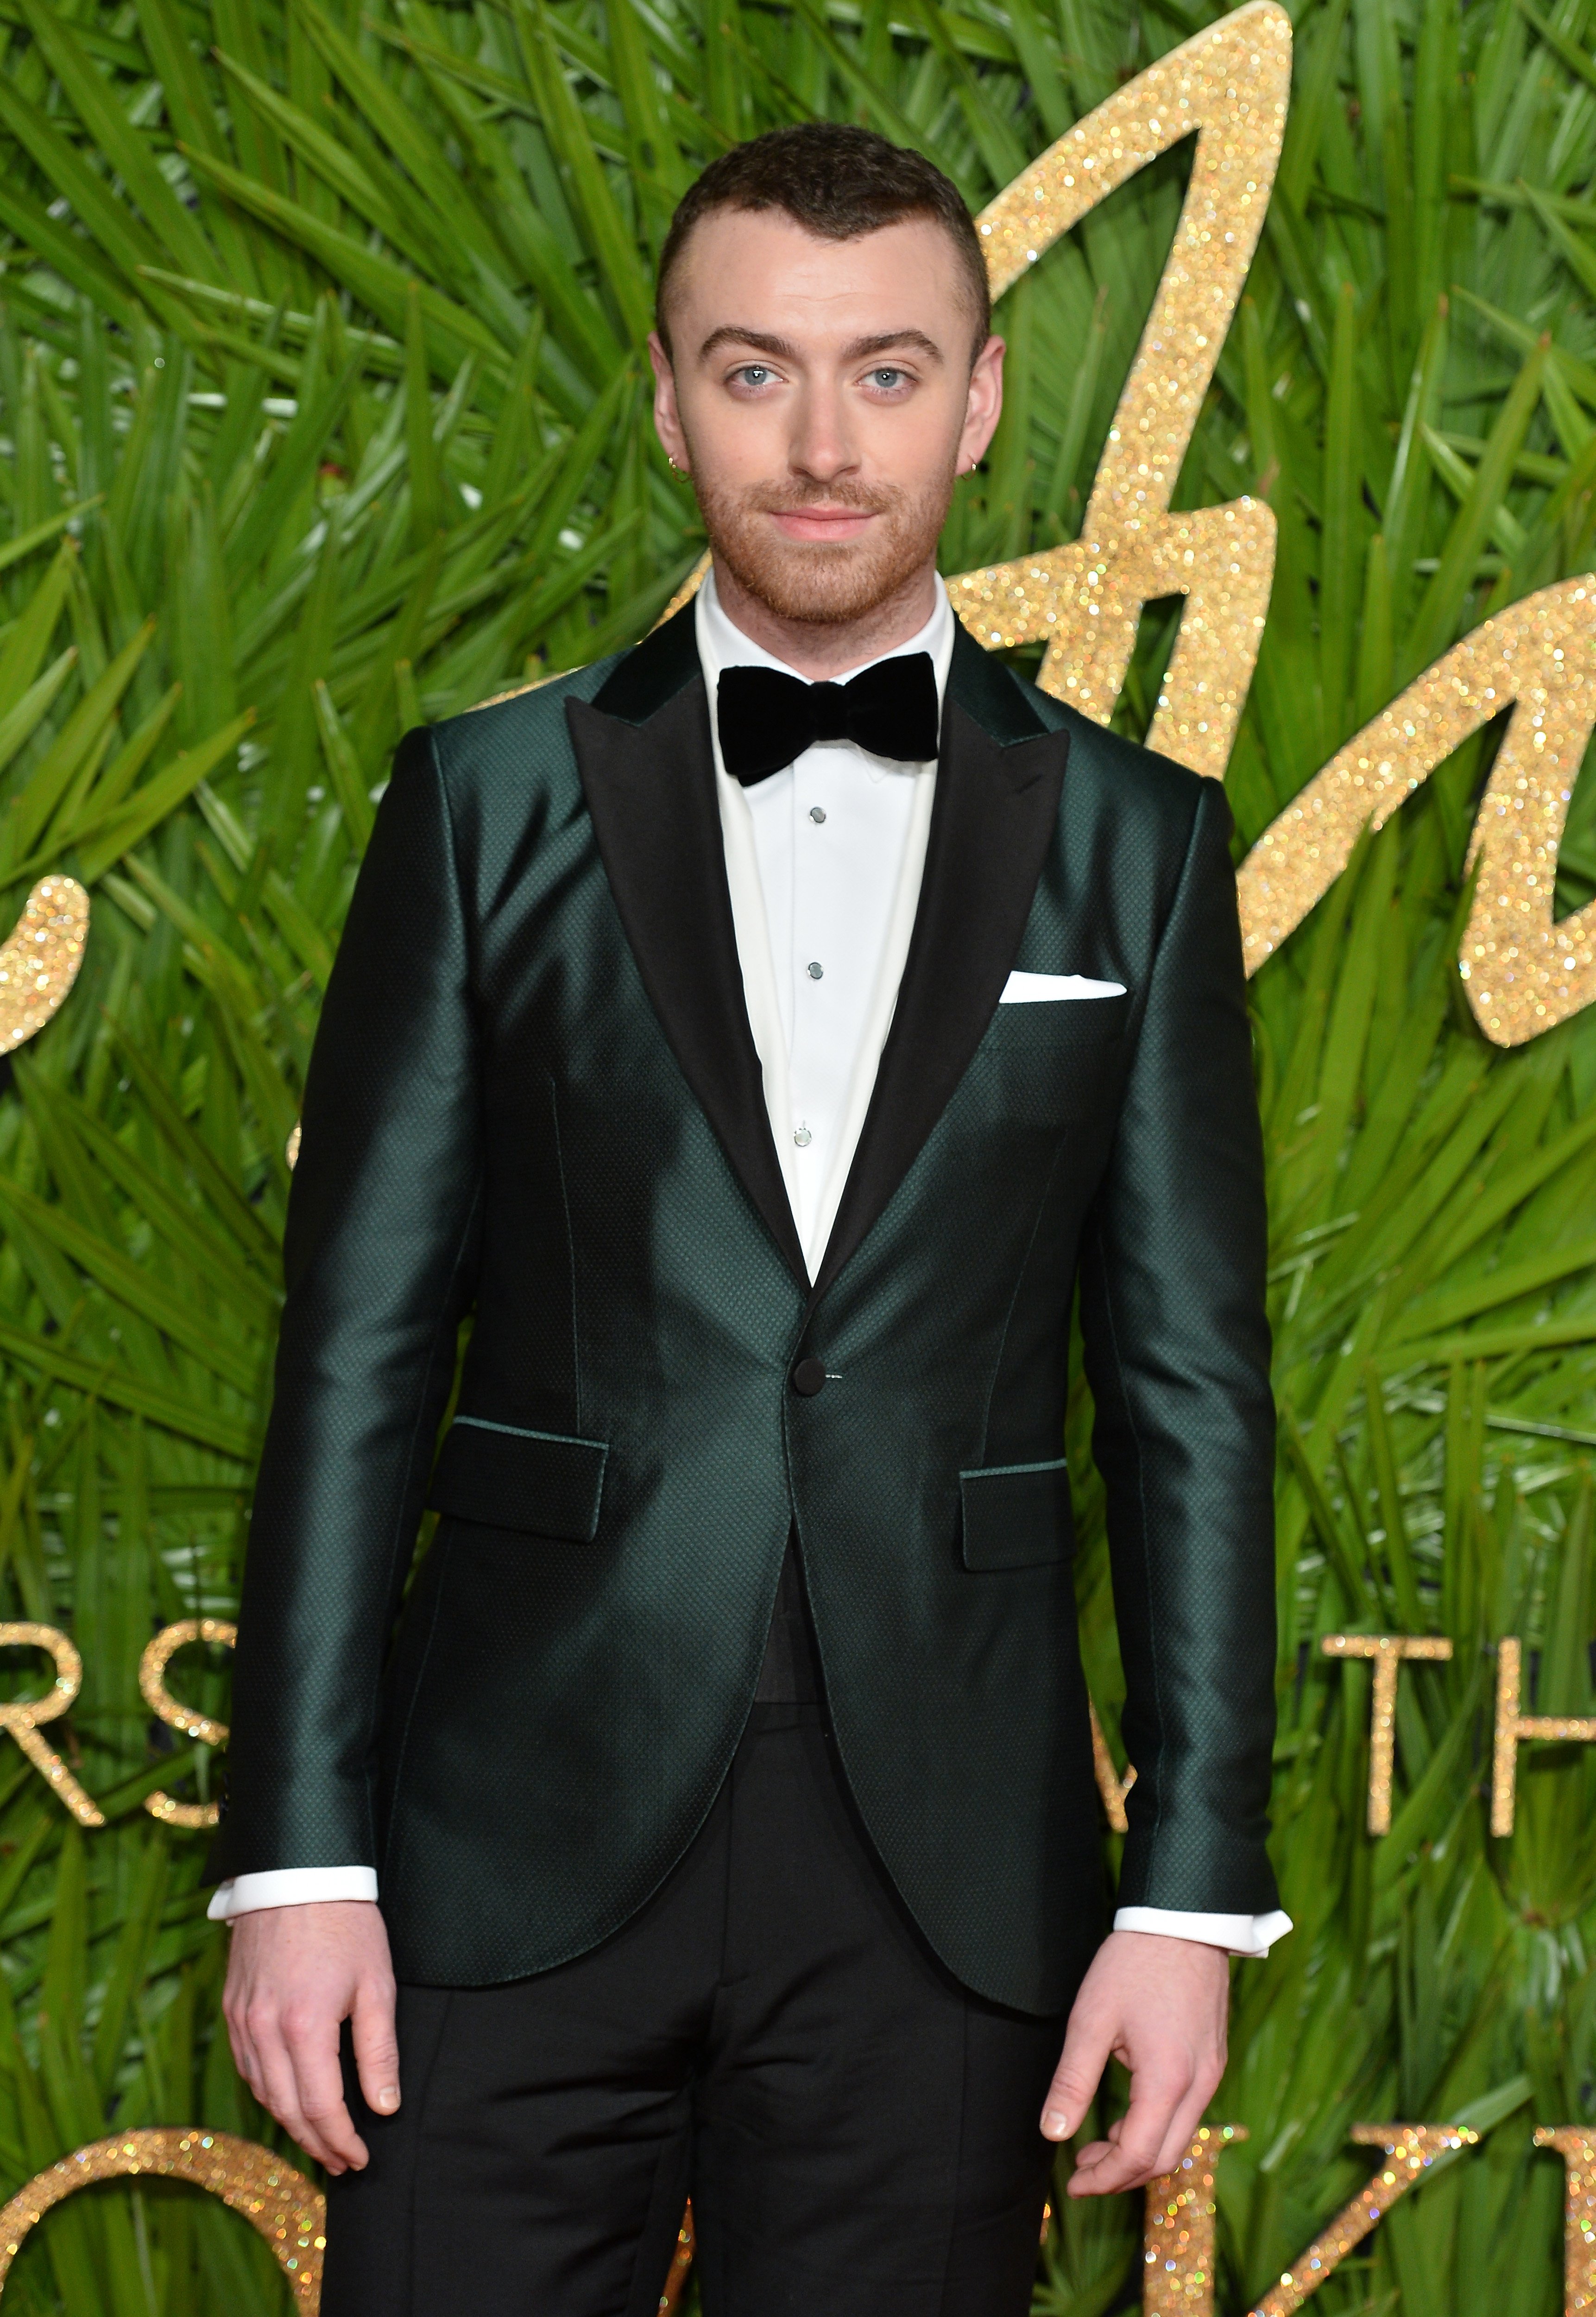 Sam Smith attends The Fashion Awards 2017 in partnership with Swarovski at Royal Albert Hall on December 4, 2017, in London, England. | Source: Getty Images